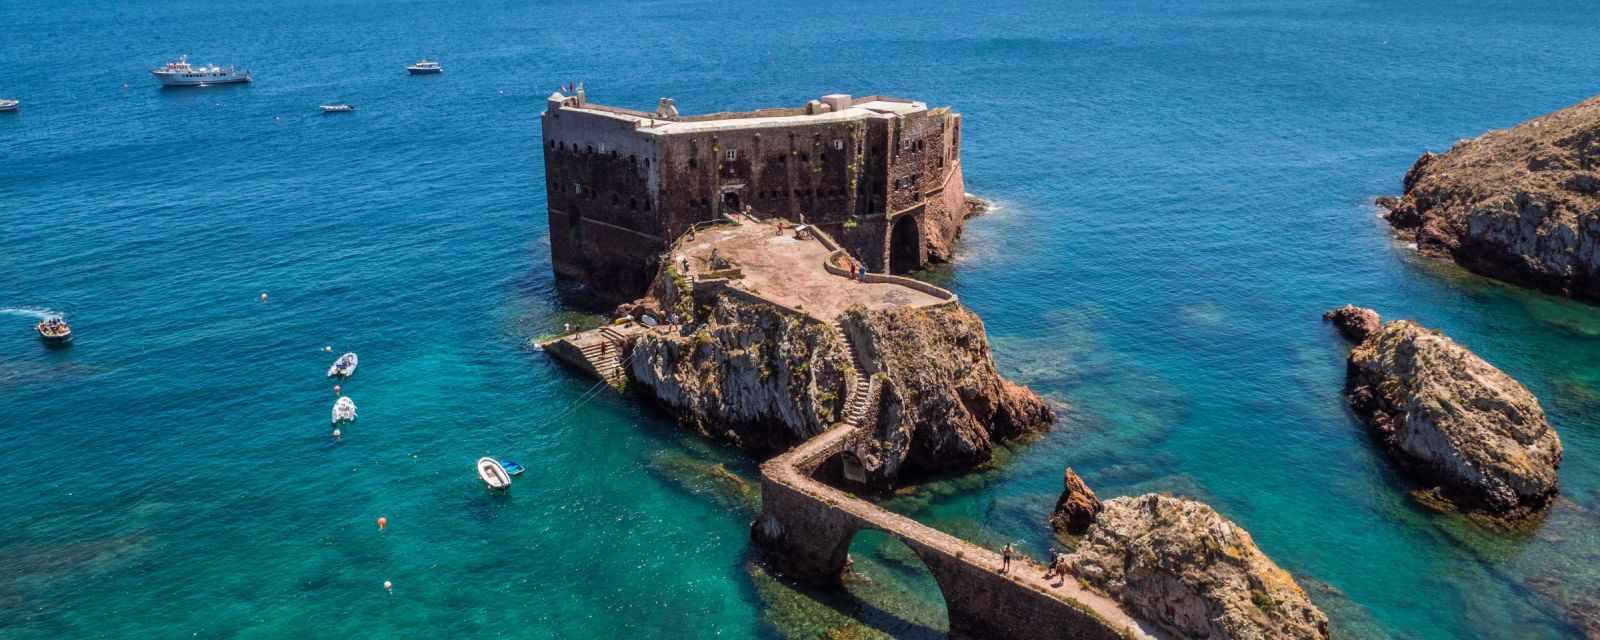 Berlengas Islands Guide - A 50 Minutes Boat Ride from Peniche in Portugal